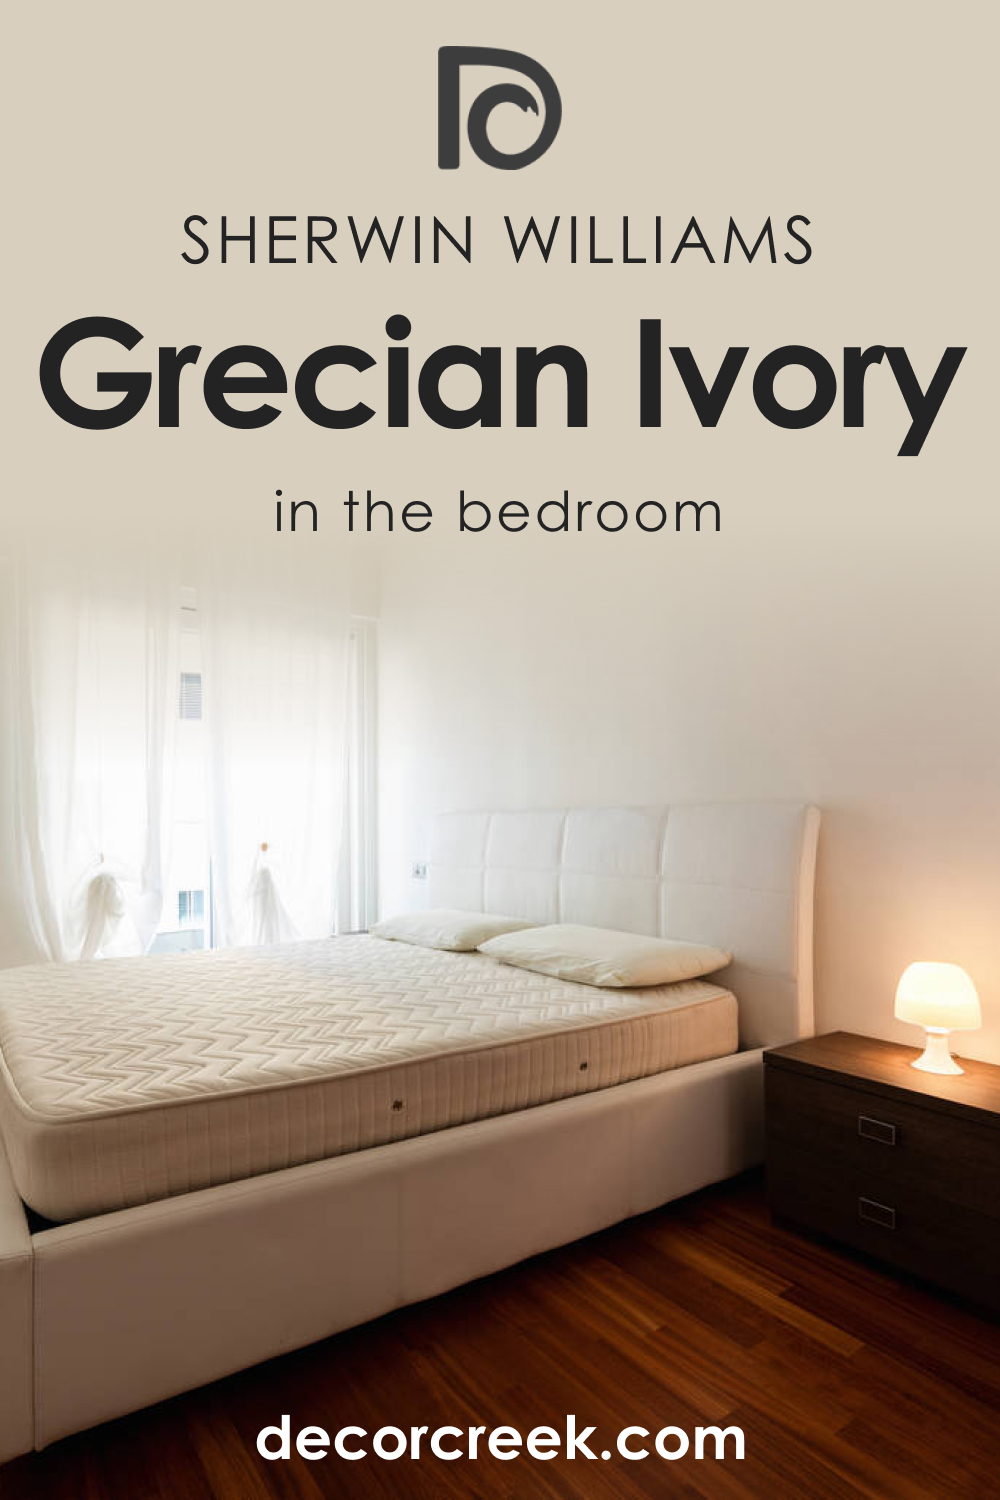 How to Use SW 7541 Grecian Ivory in the Bedroom?